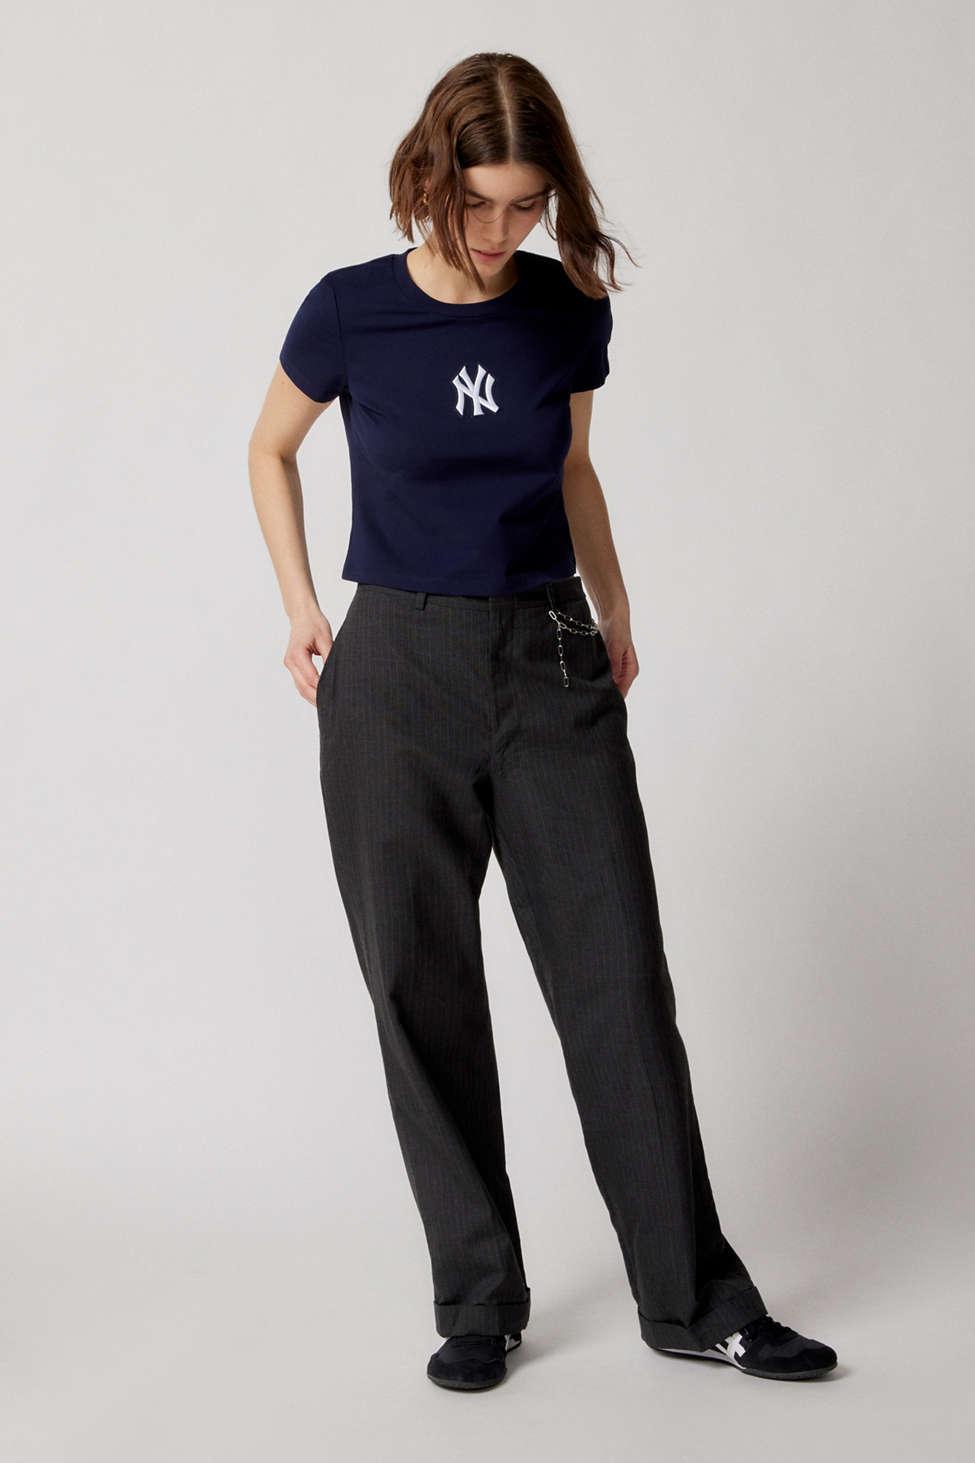 Urban Outfitters Mlb New York Yankees Embroidered Baby Tee in